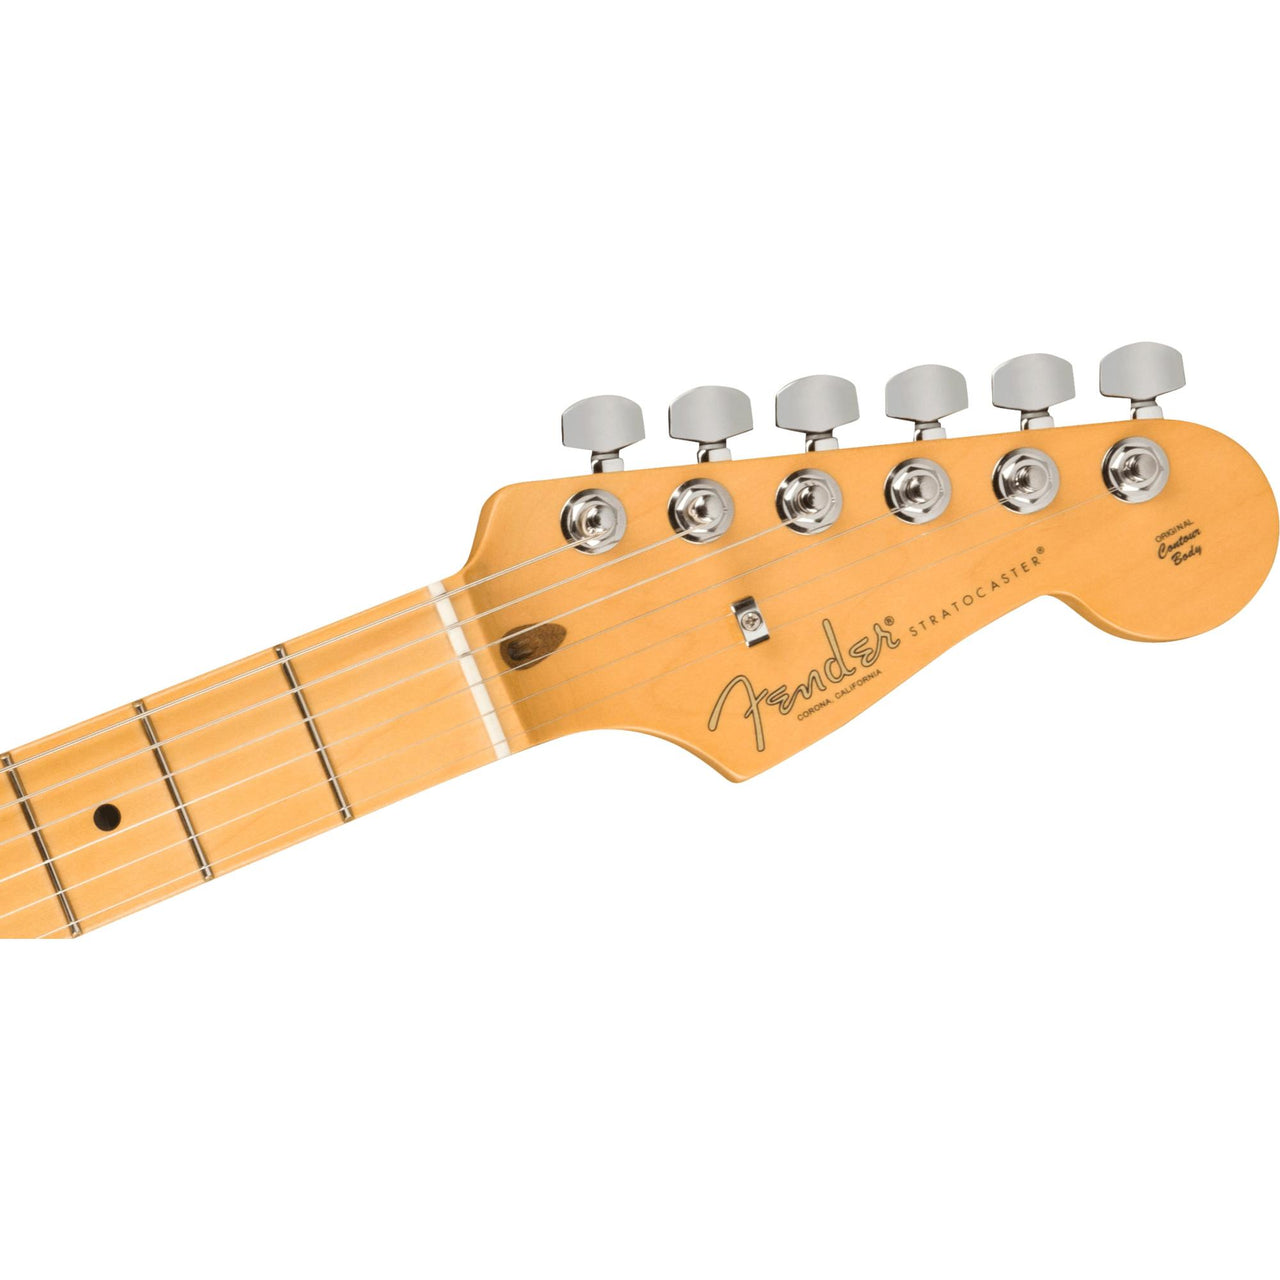 Guitarra Fender American Professional II Stratocaster Electrica Olympic White 0113902705